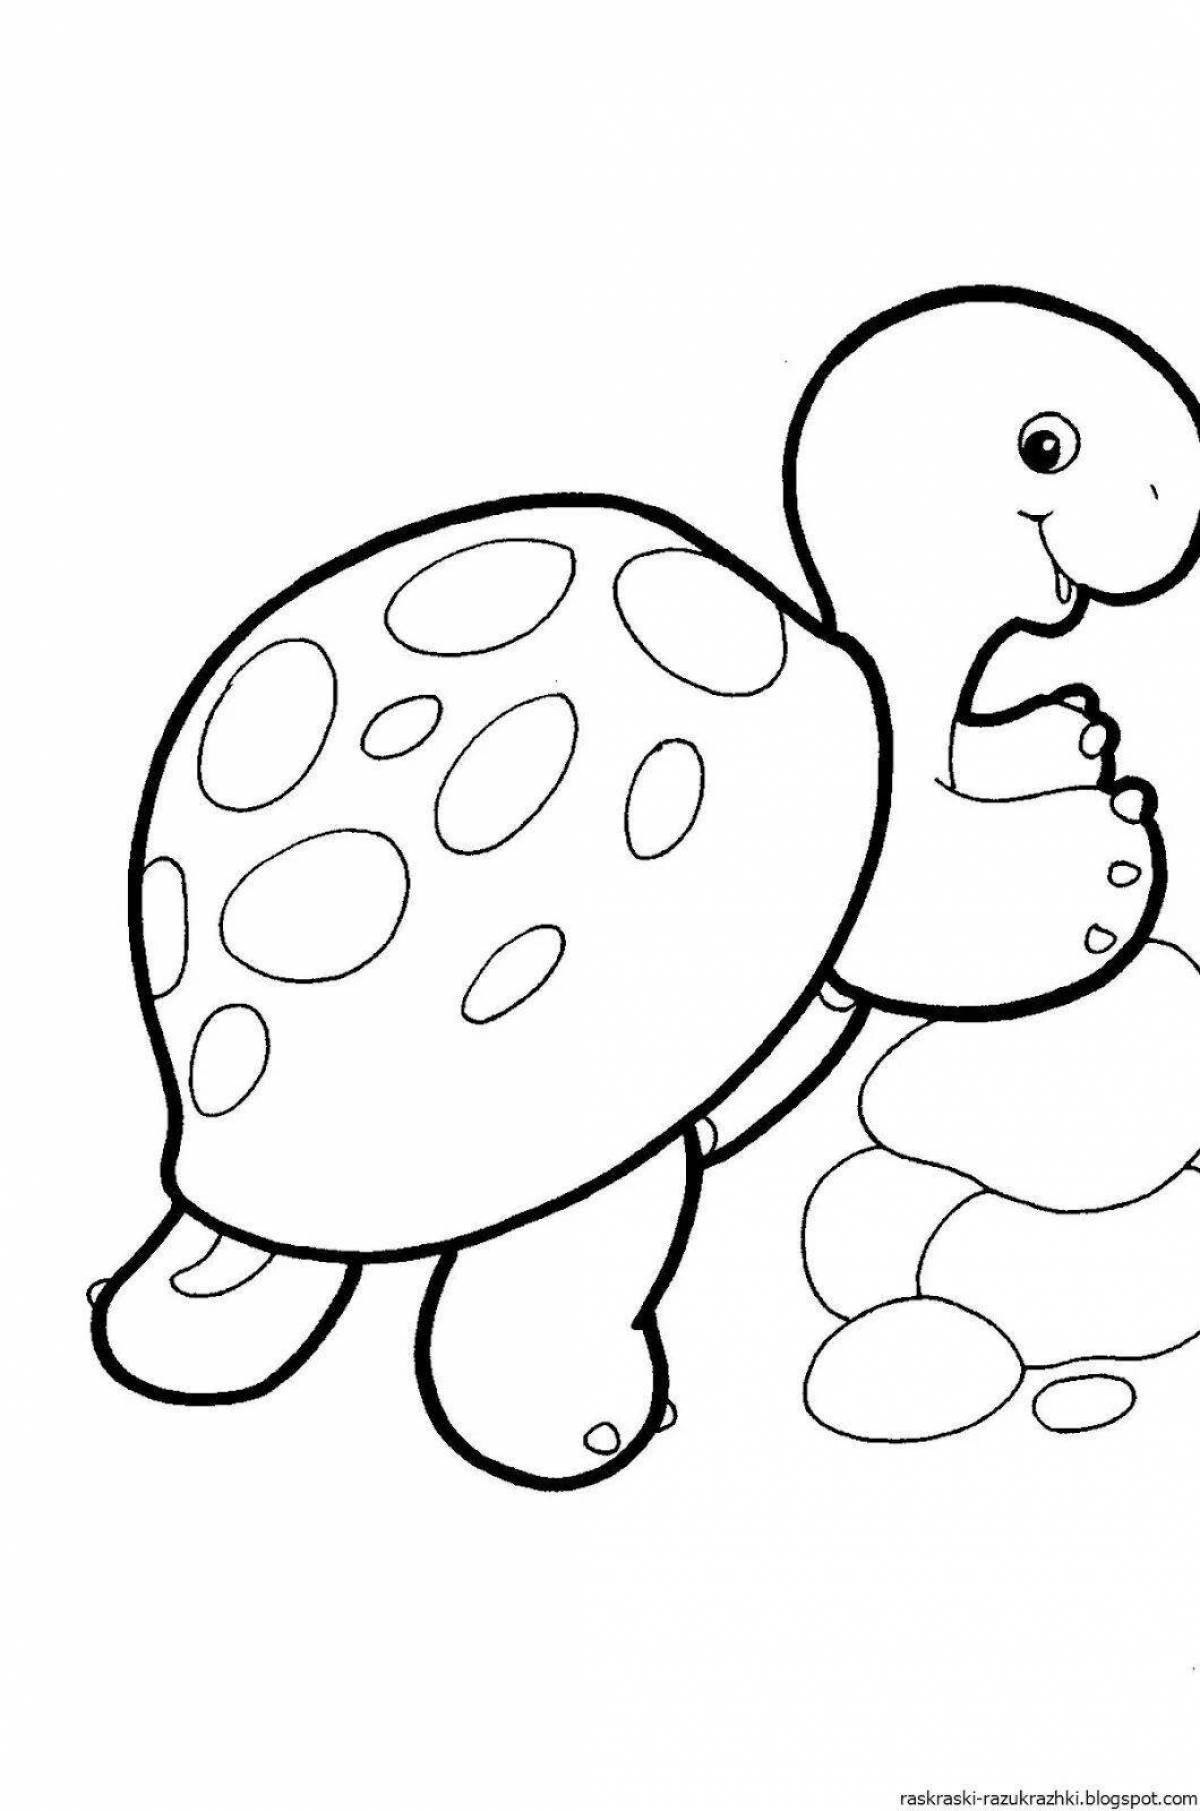 Animals playful coloring book for 3 year olds